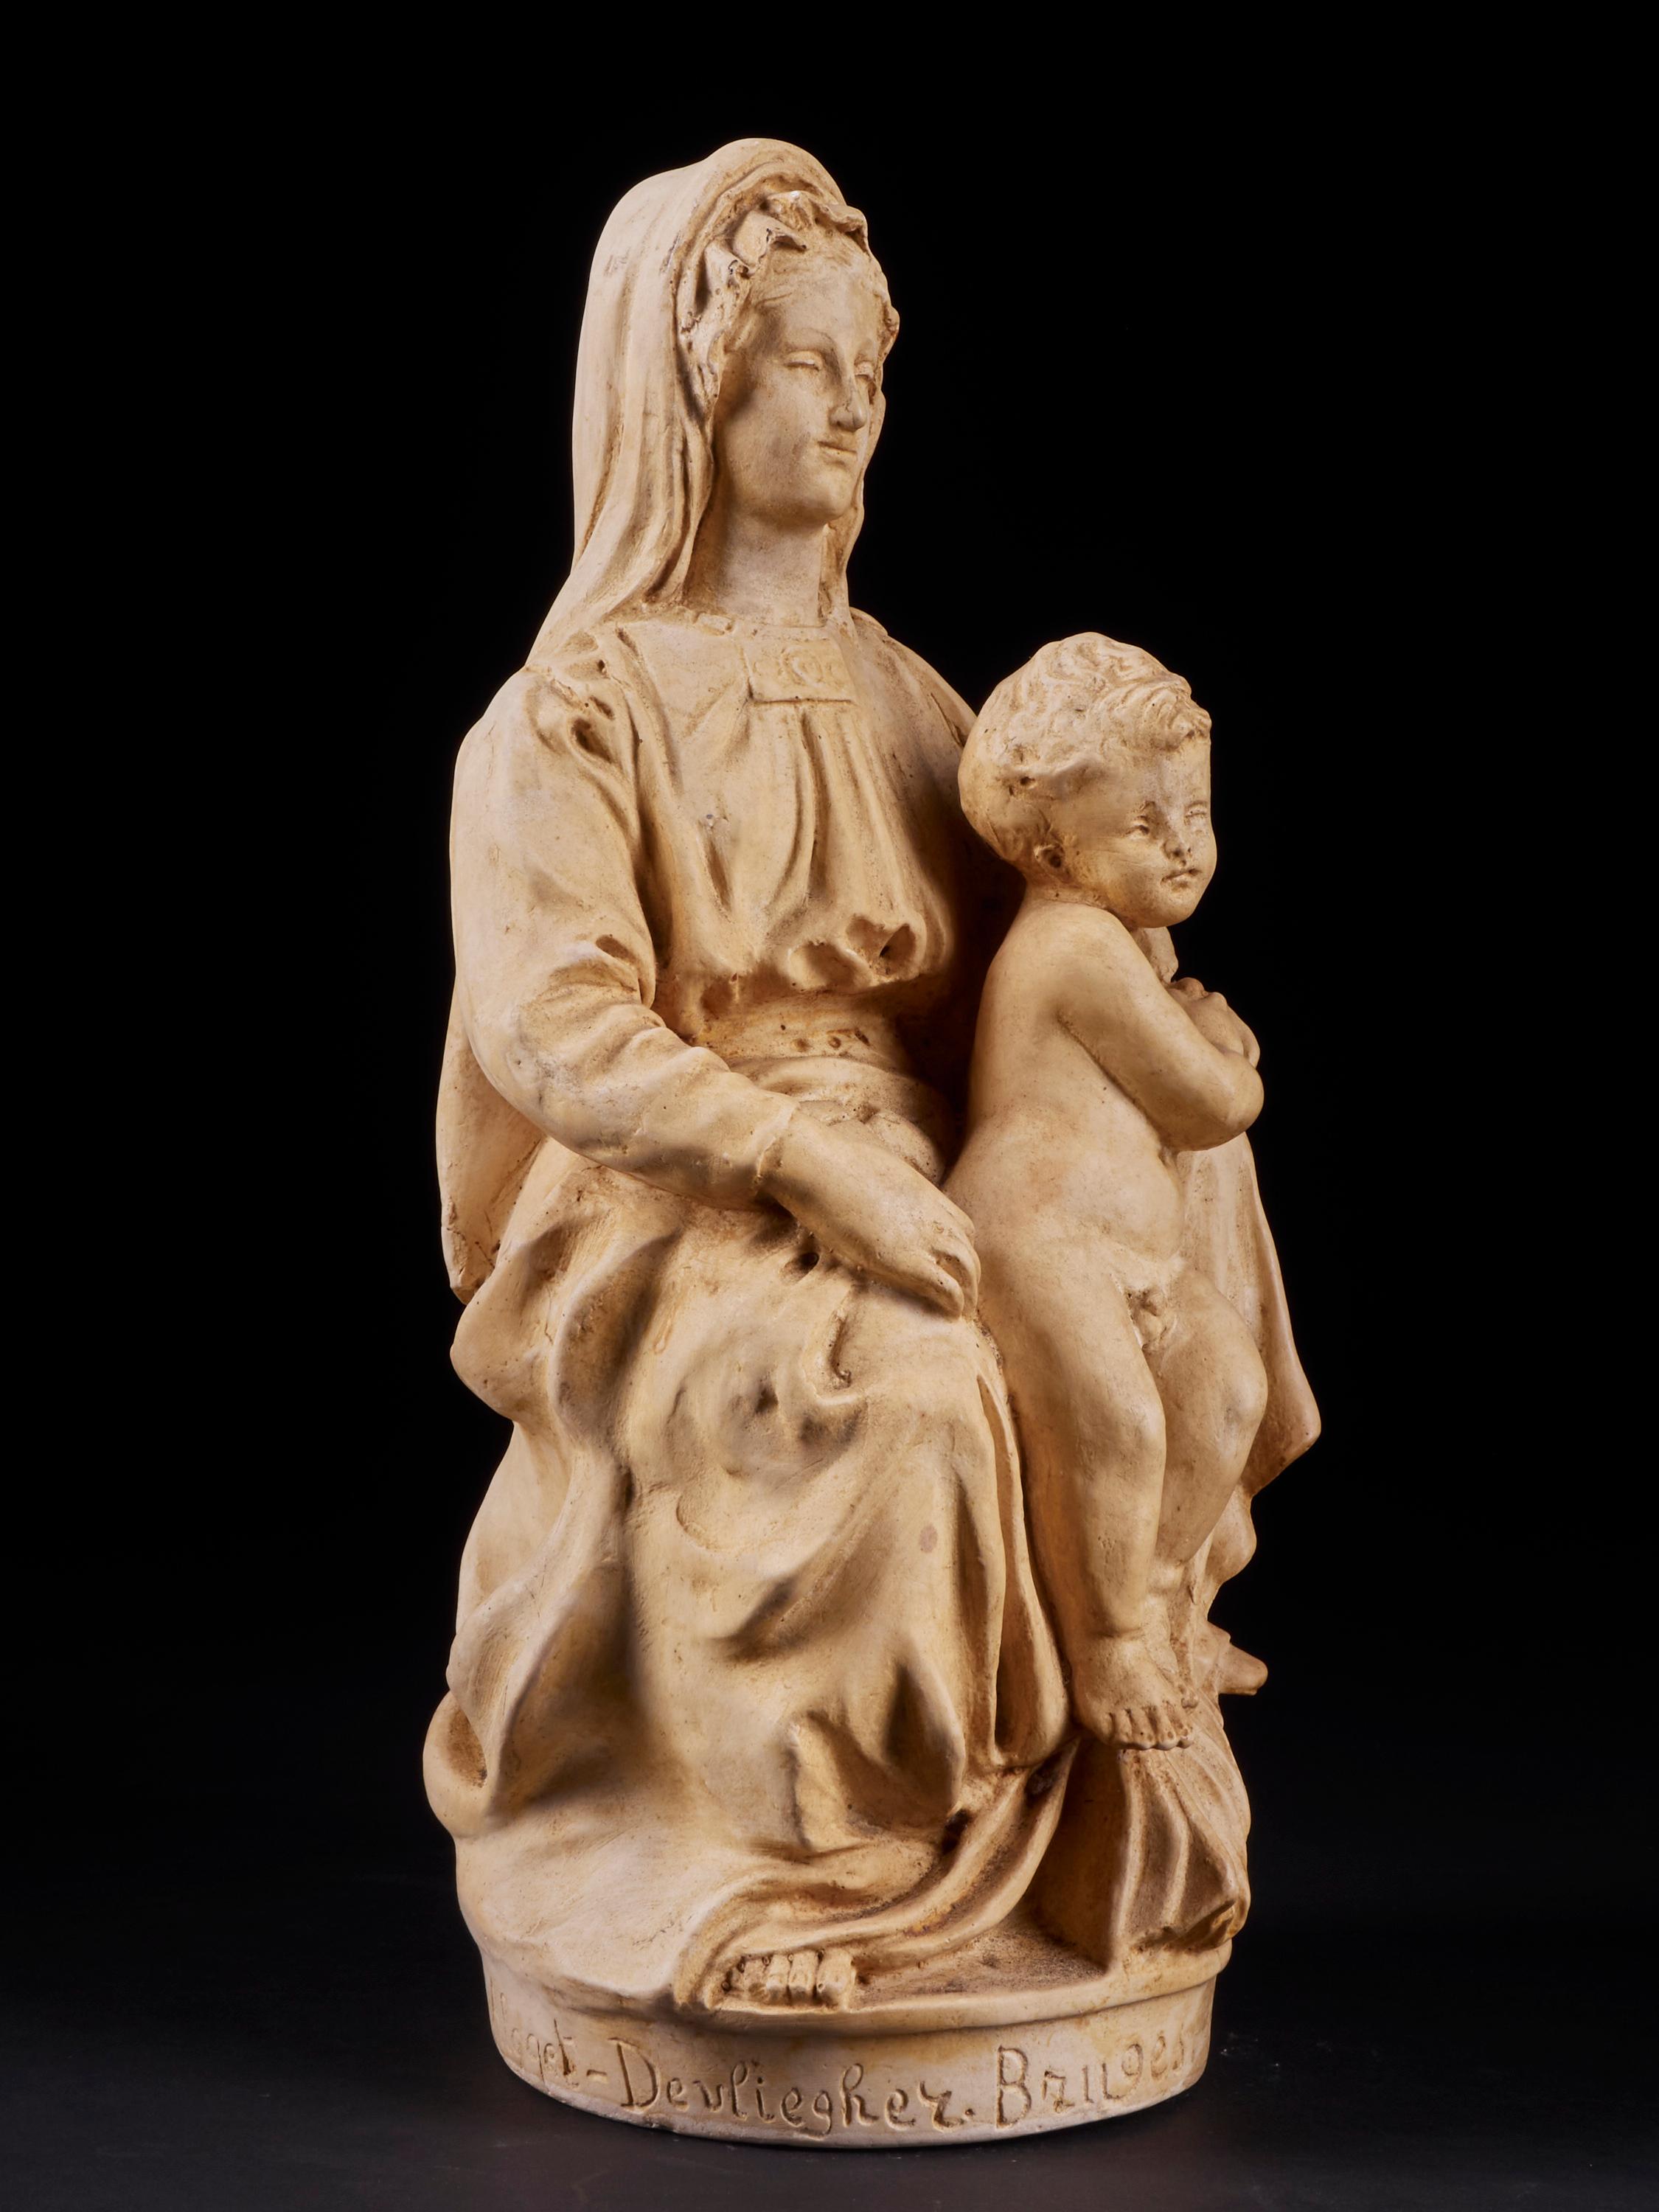 Mary and Child Plaster Statue Signed and Marked Algget, Devliegher from Bruges 1